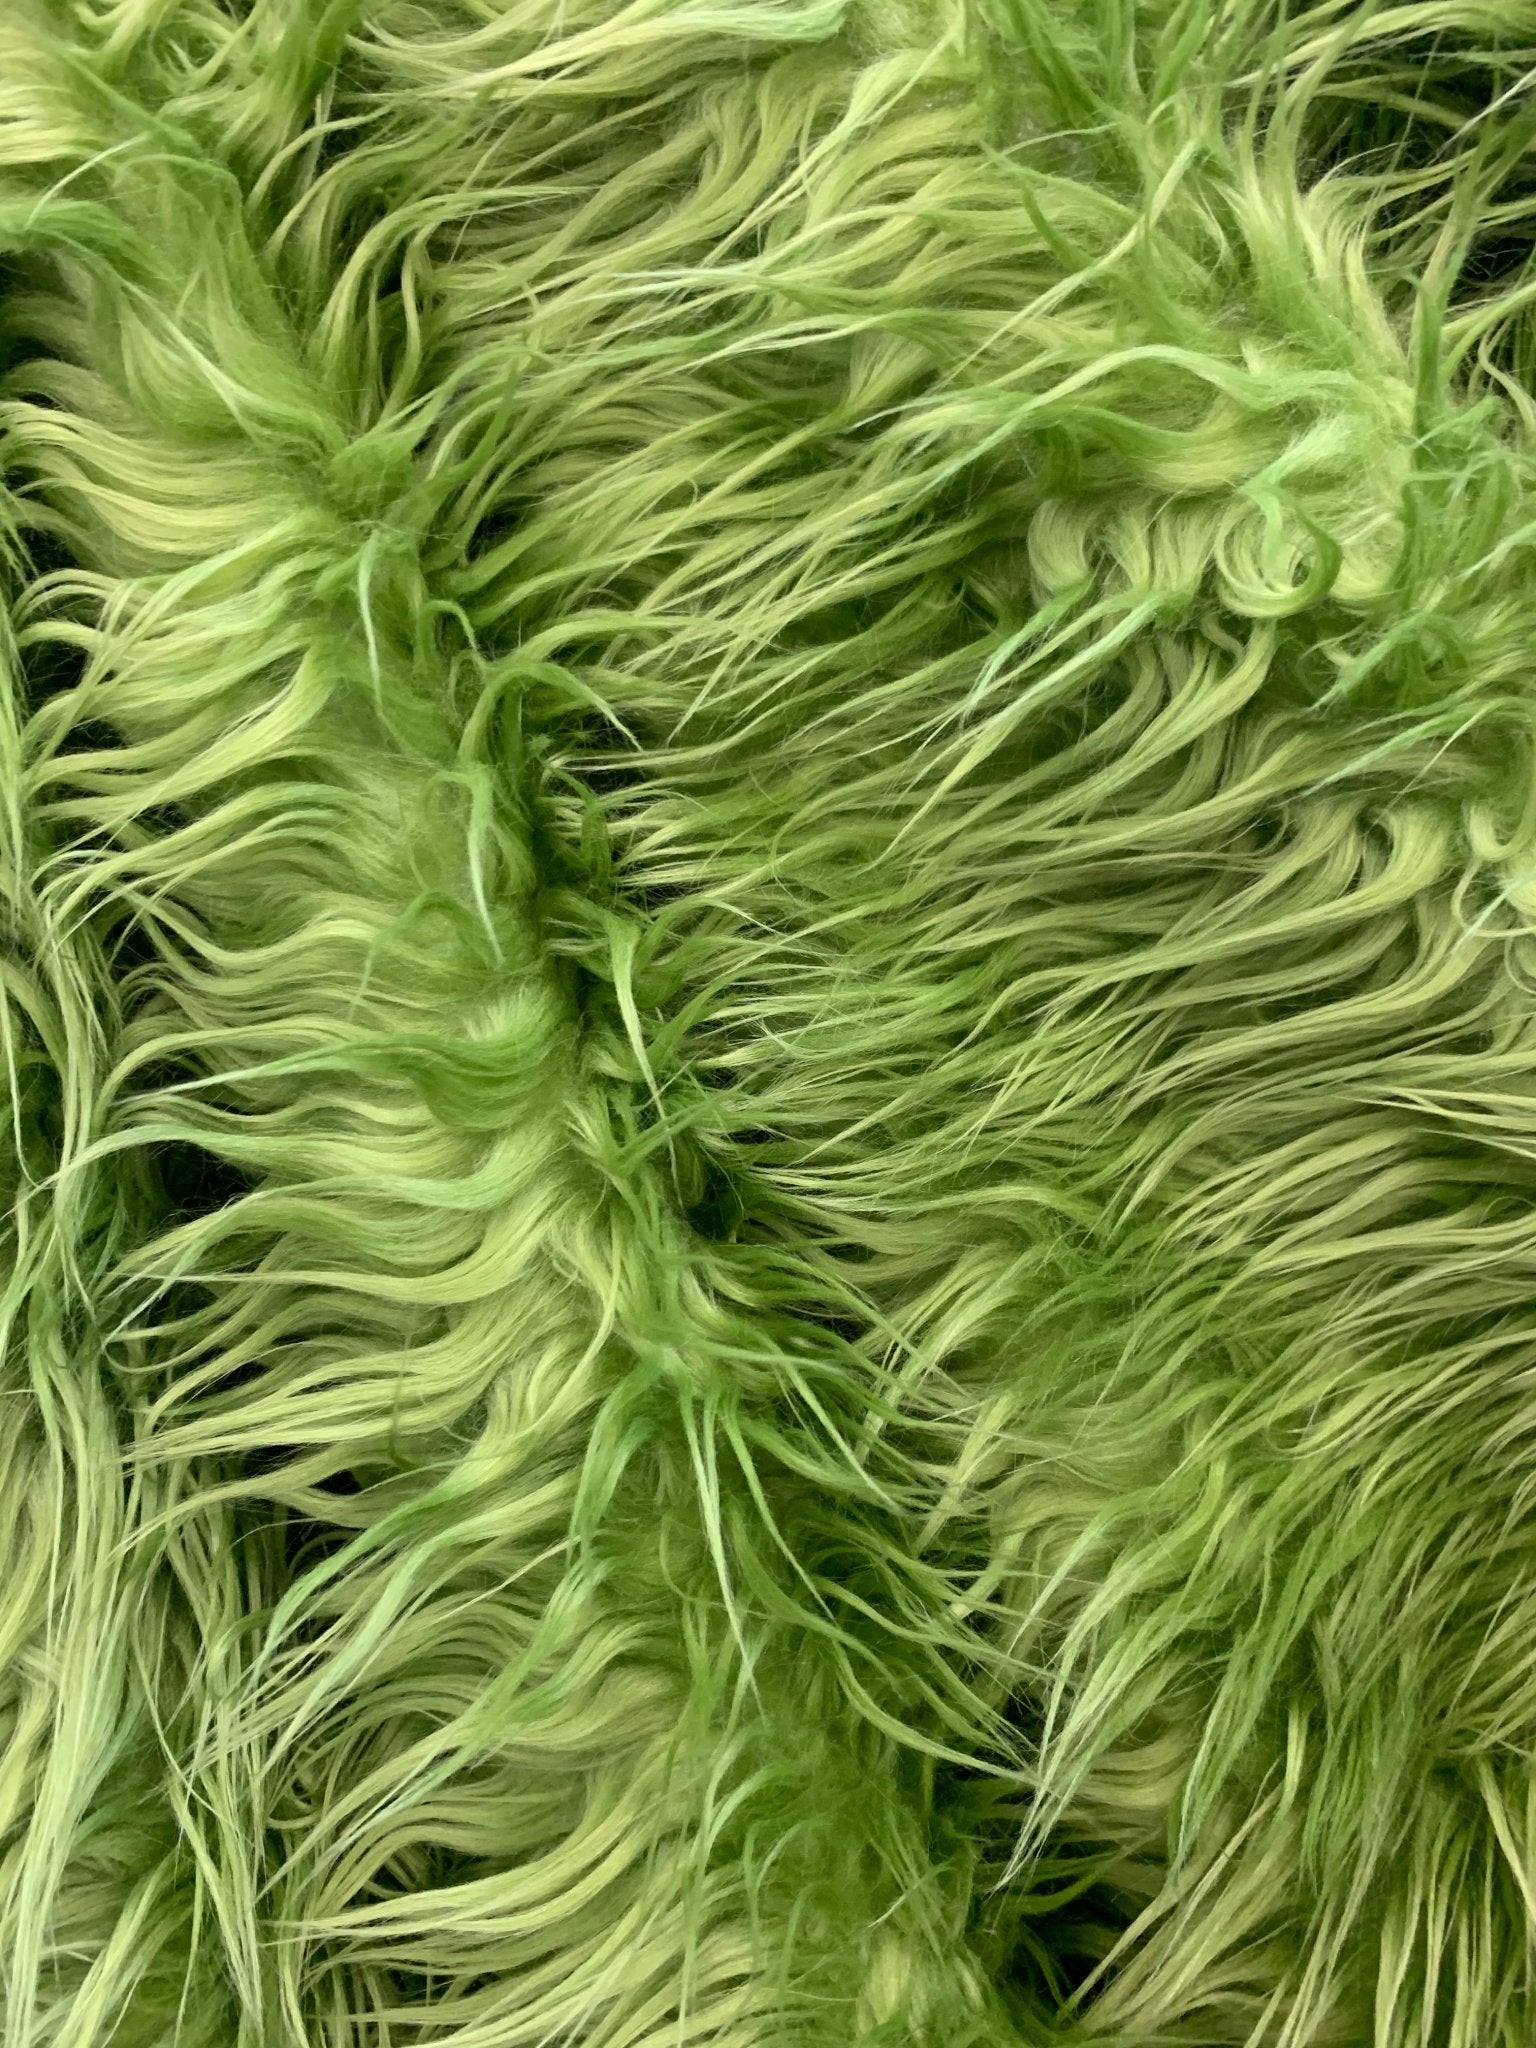 Mongolian Long Pile Fake Faux Fur Fabric Sold By The YardICEFABRICICE FABRICSLime GreenBy The Yard (60 inches Wide)Mongolian Long Pile Fake Faux Fur Fabric Sold By The Yard ICEFABRIC